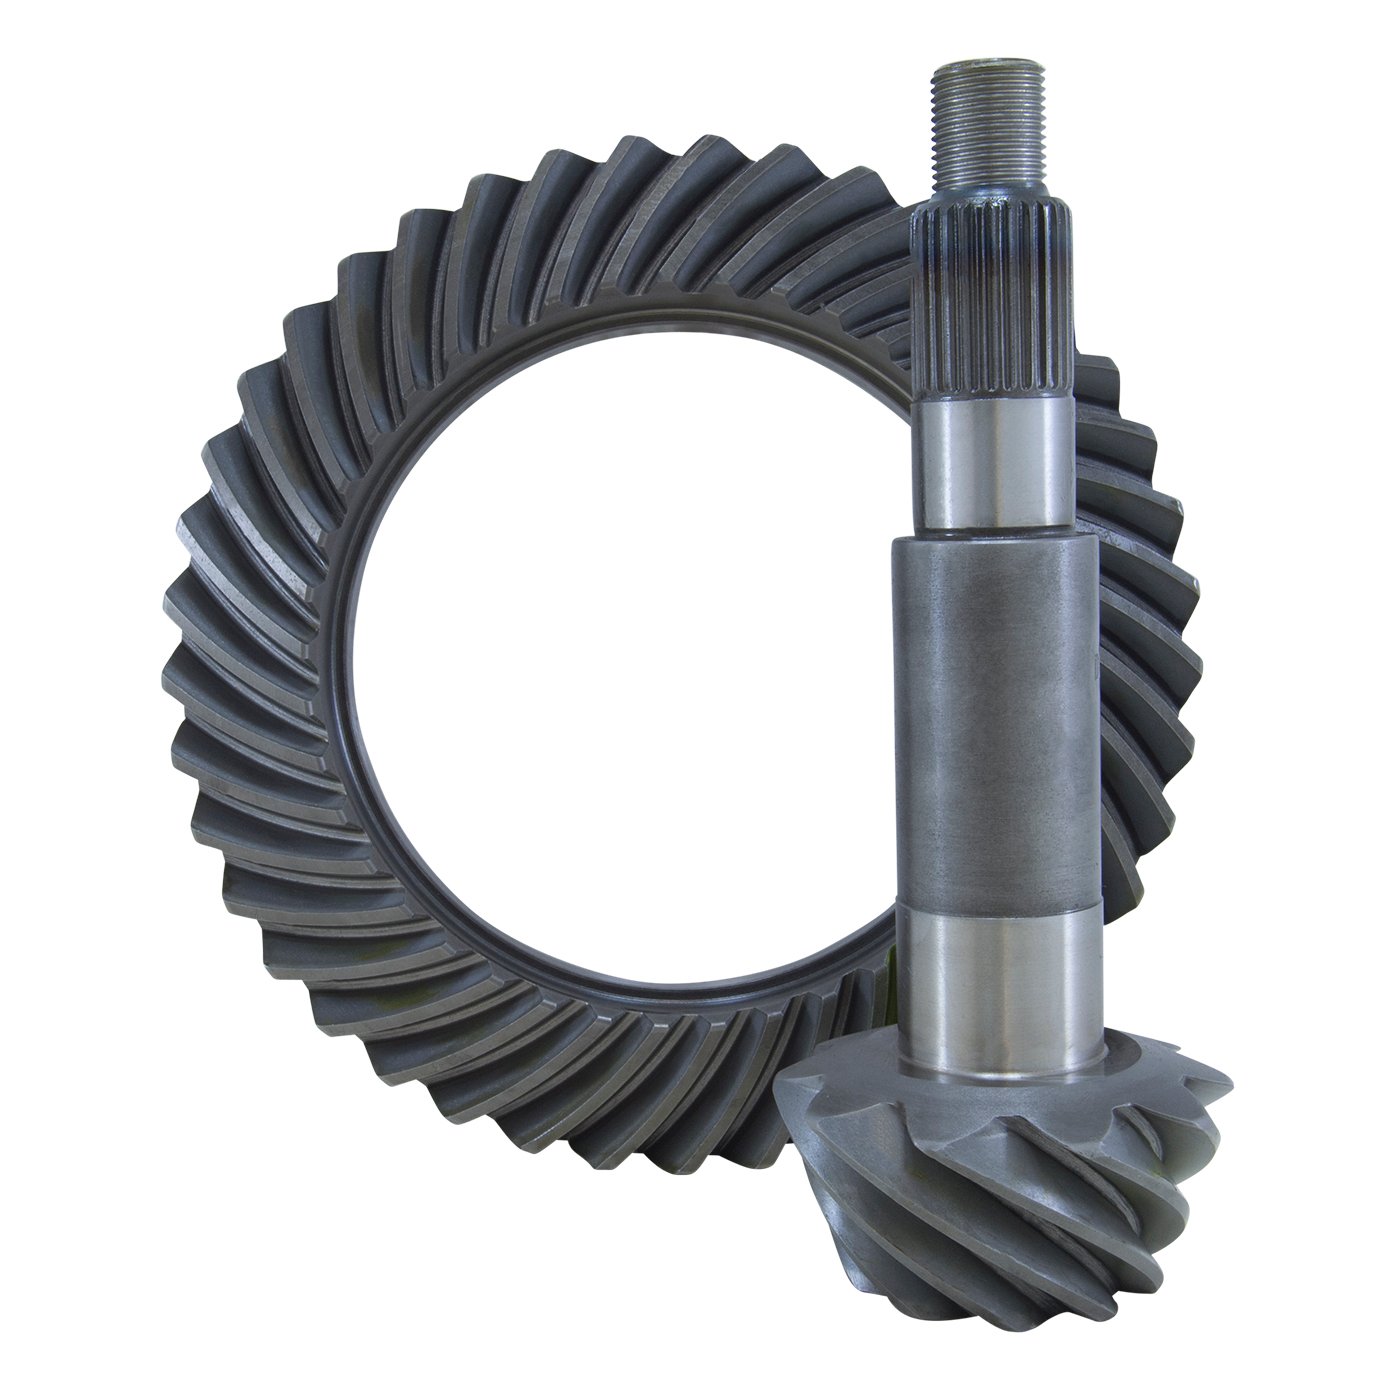 USA Standard ZG D60-456 Replacement Ring & Pinion Gear Set, For Dana 60, 4.56 Ratio